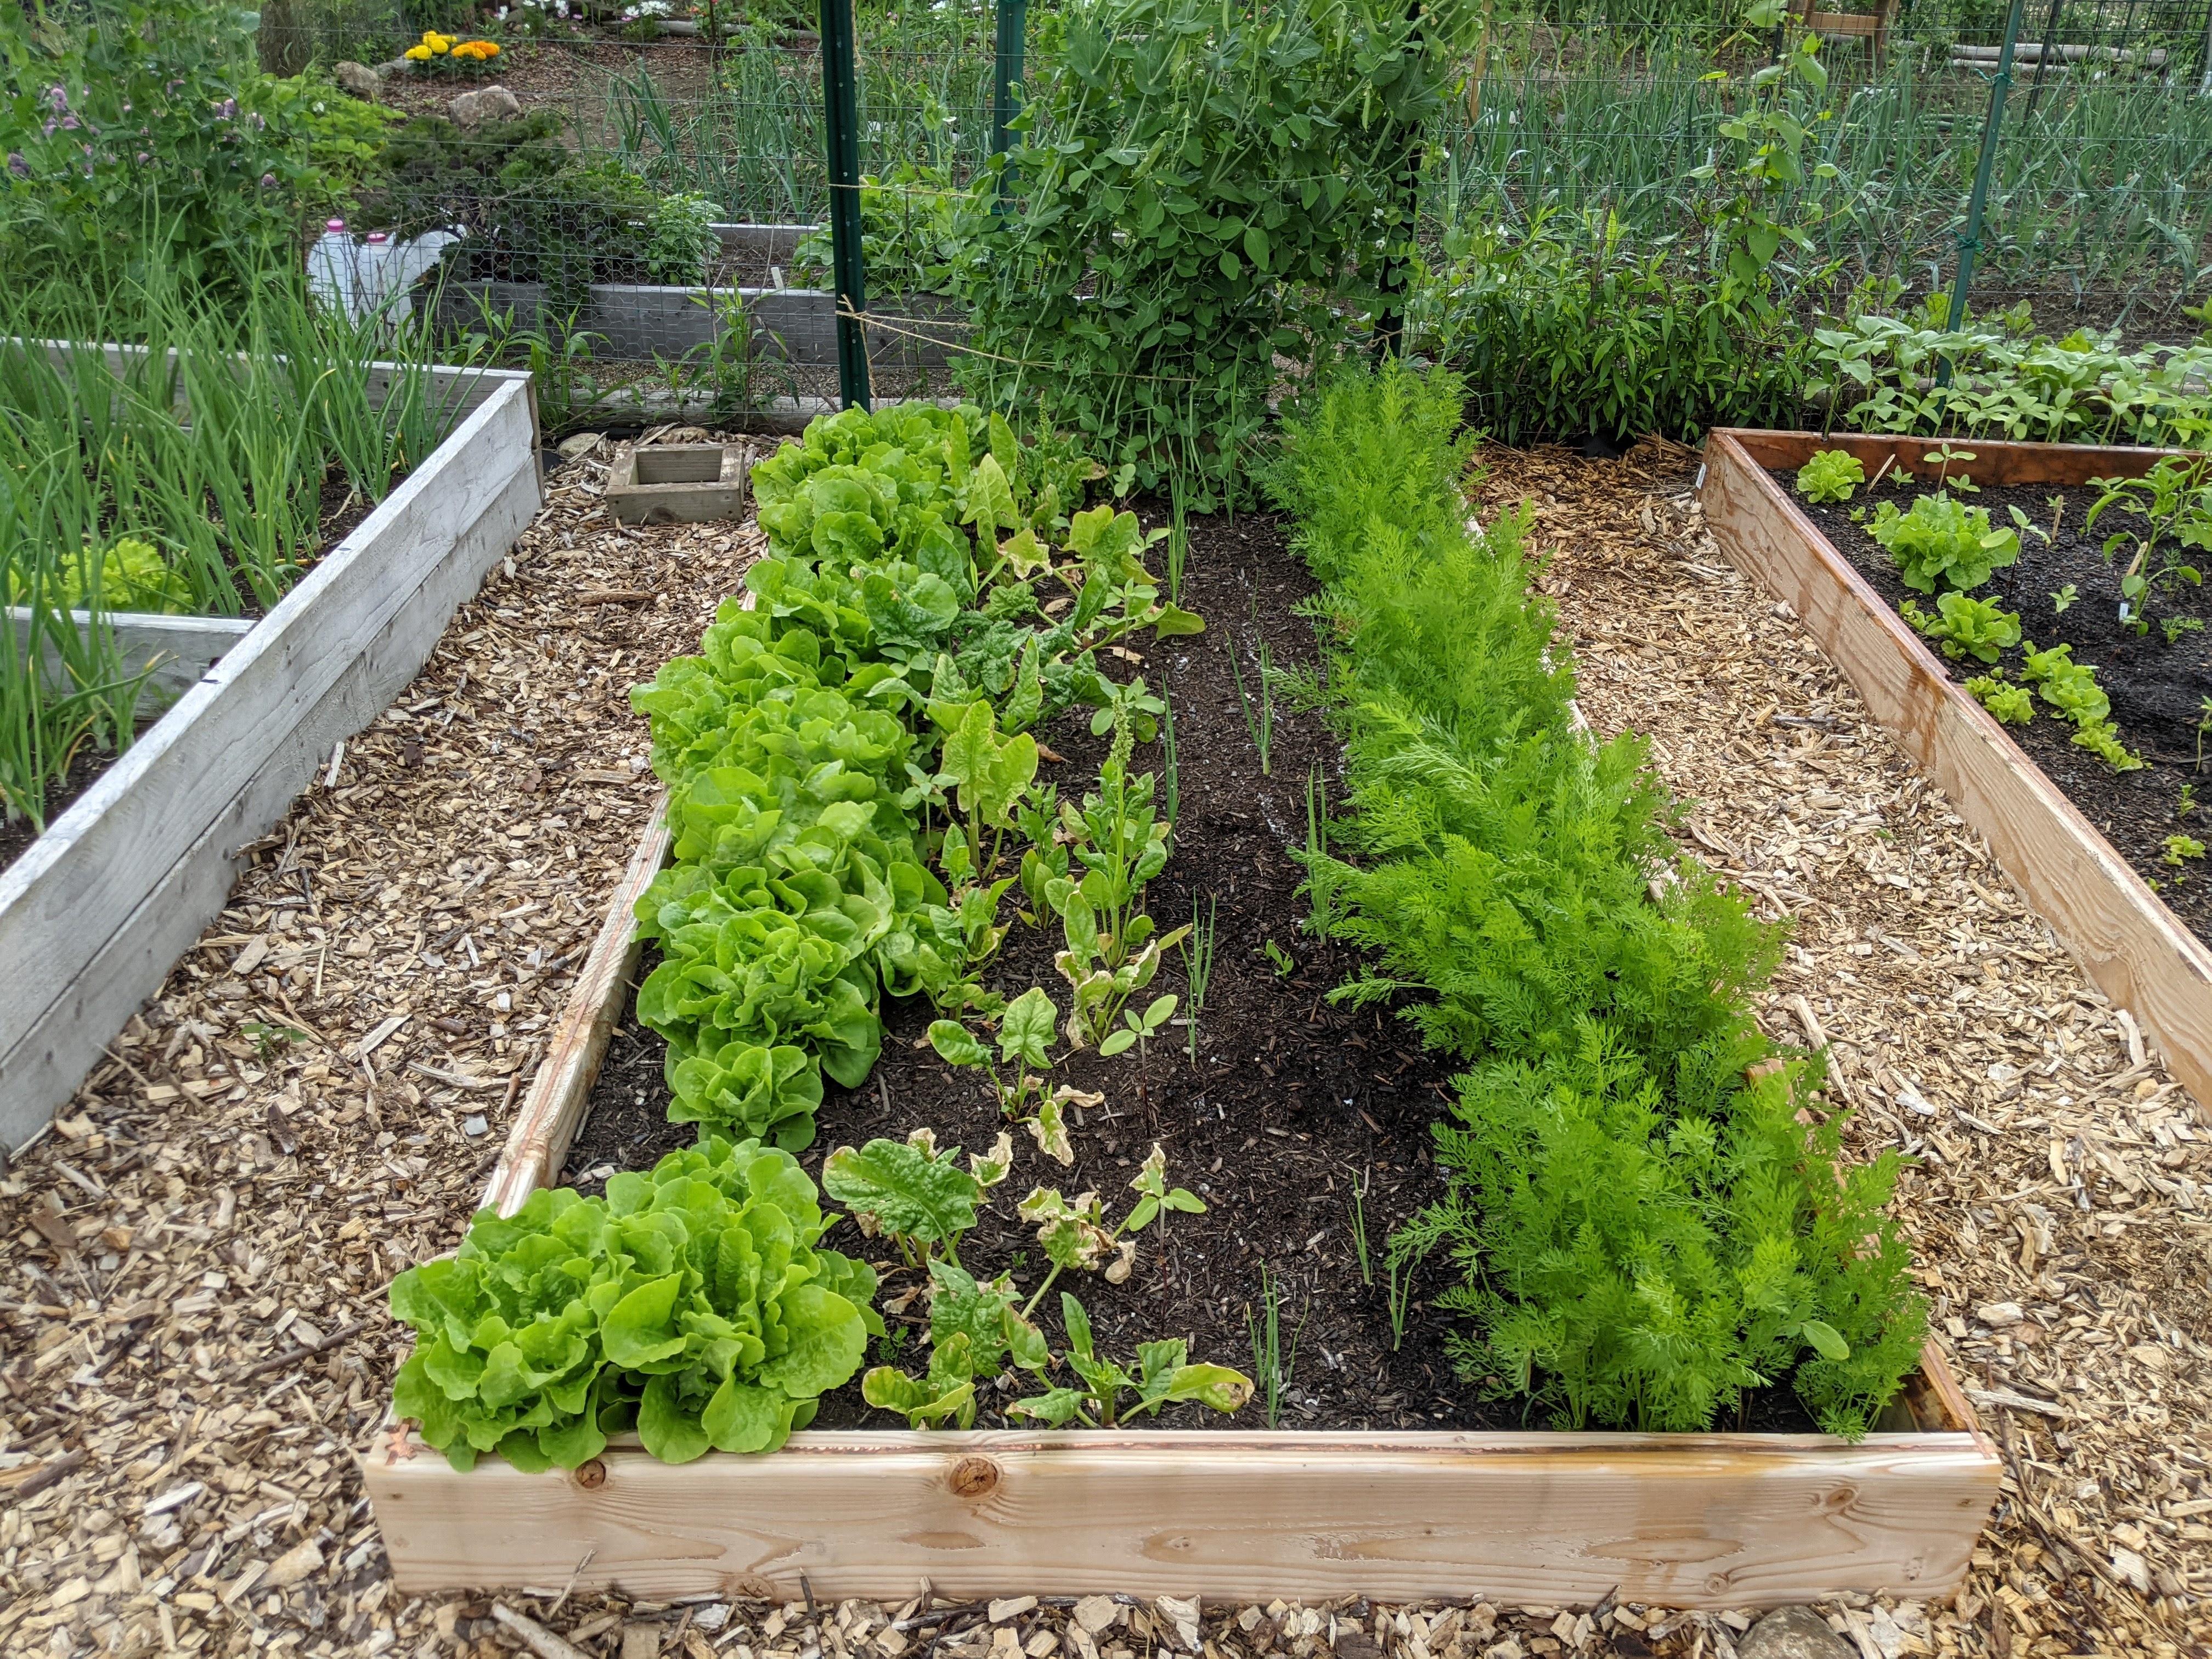 Vegetable plants in a raised bed in a community garden plot